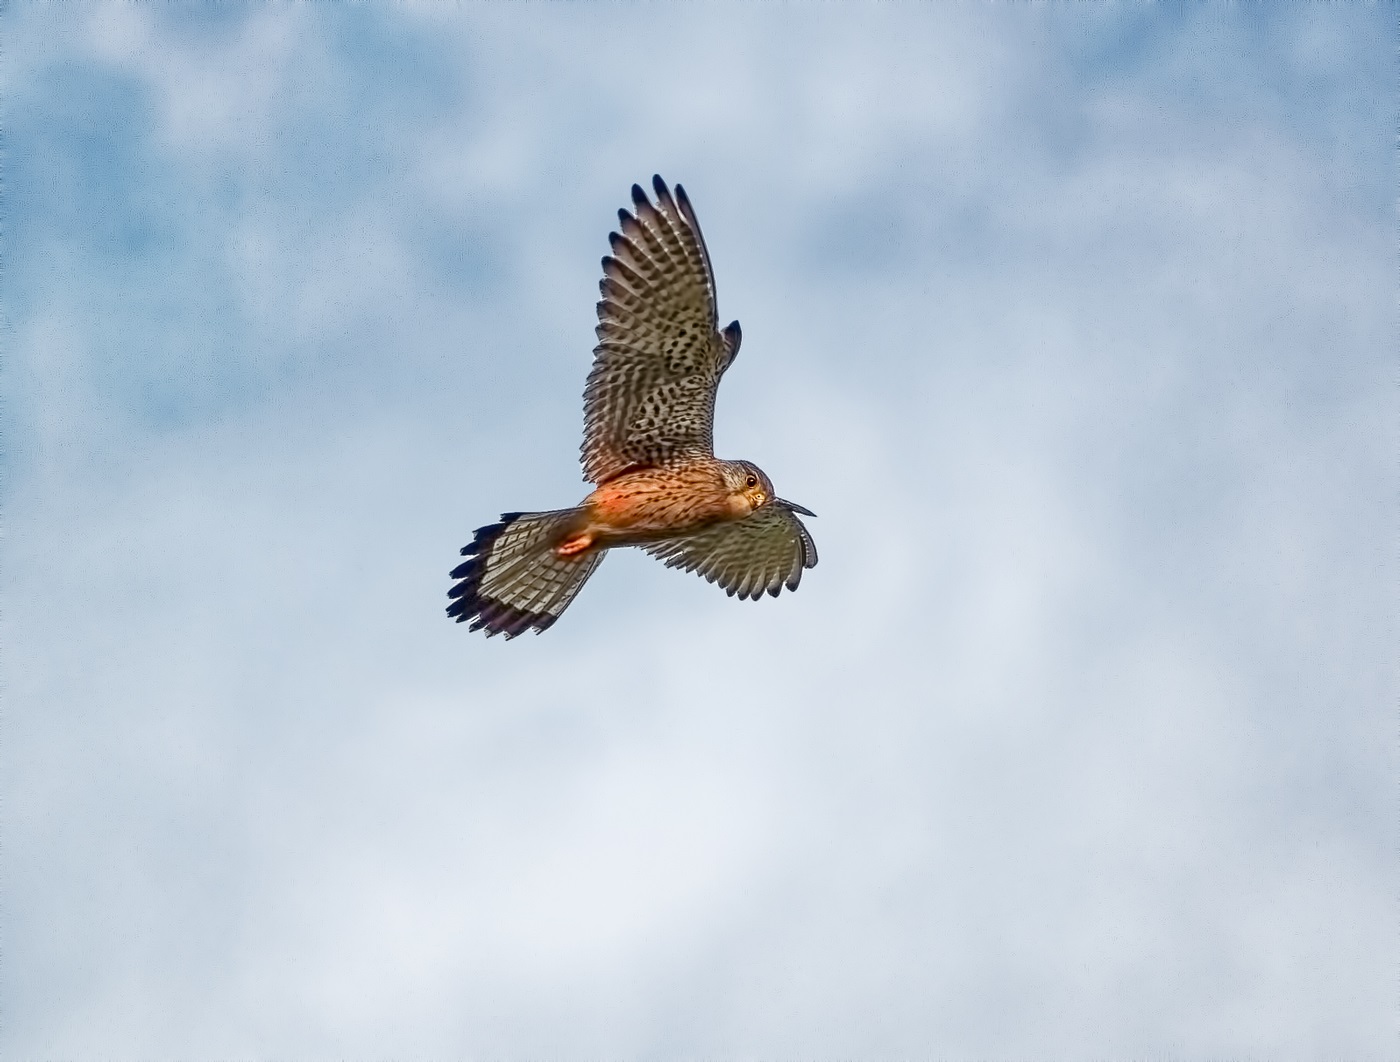 Kestrel in the sky looking out for prey